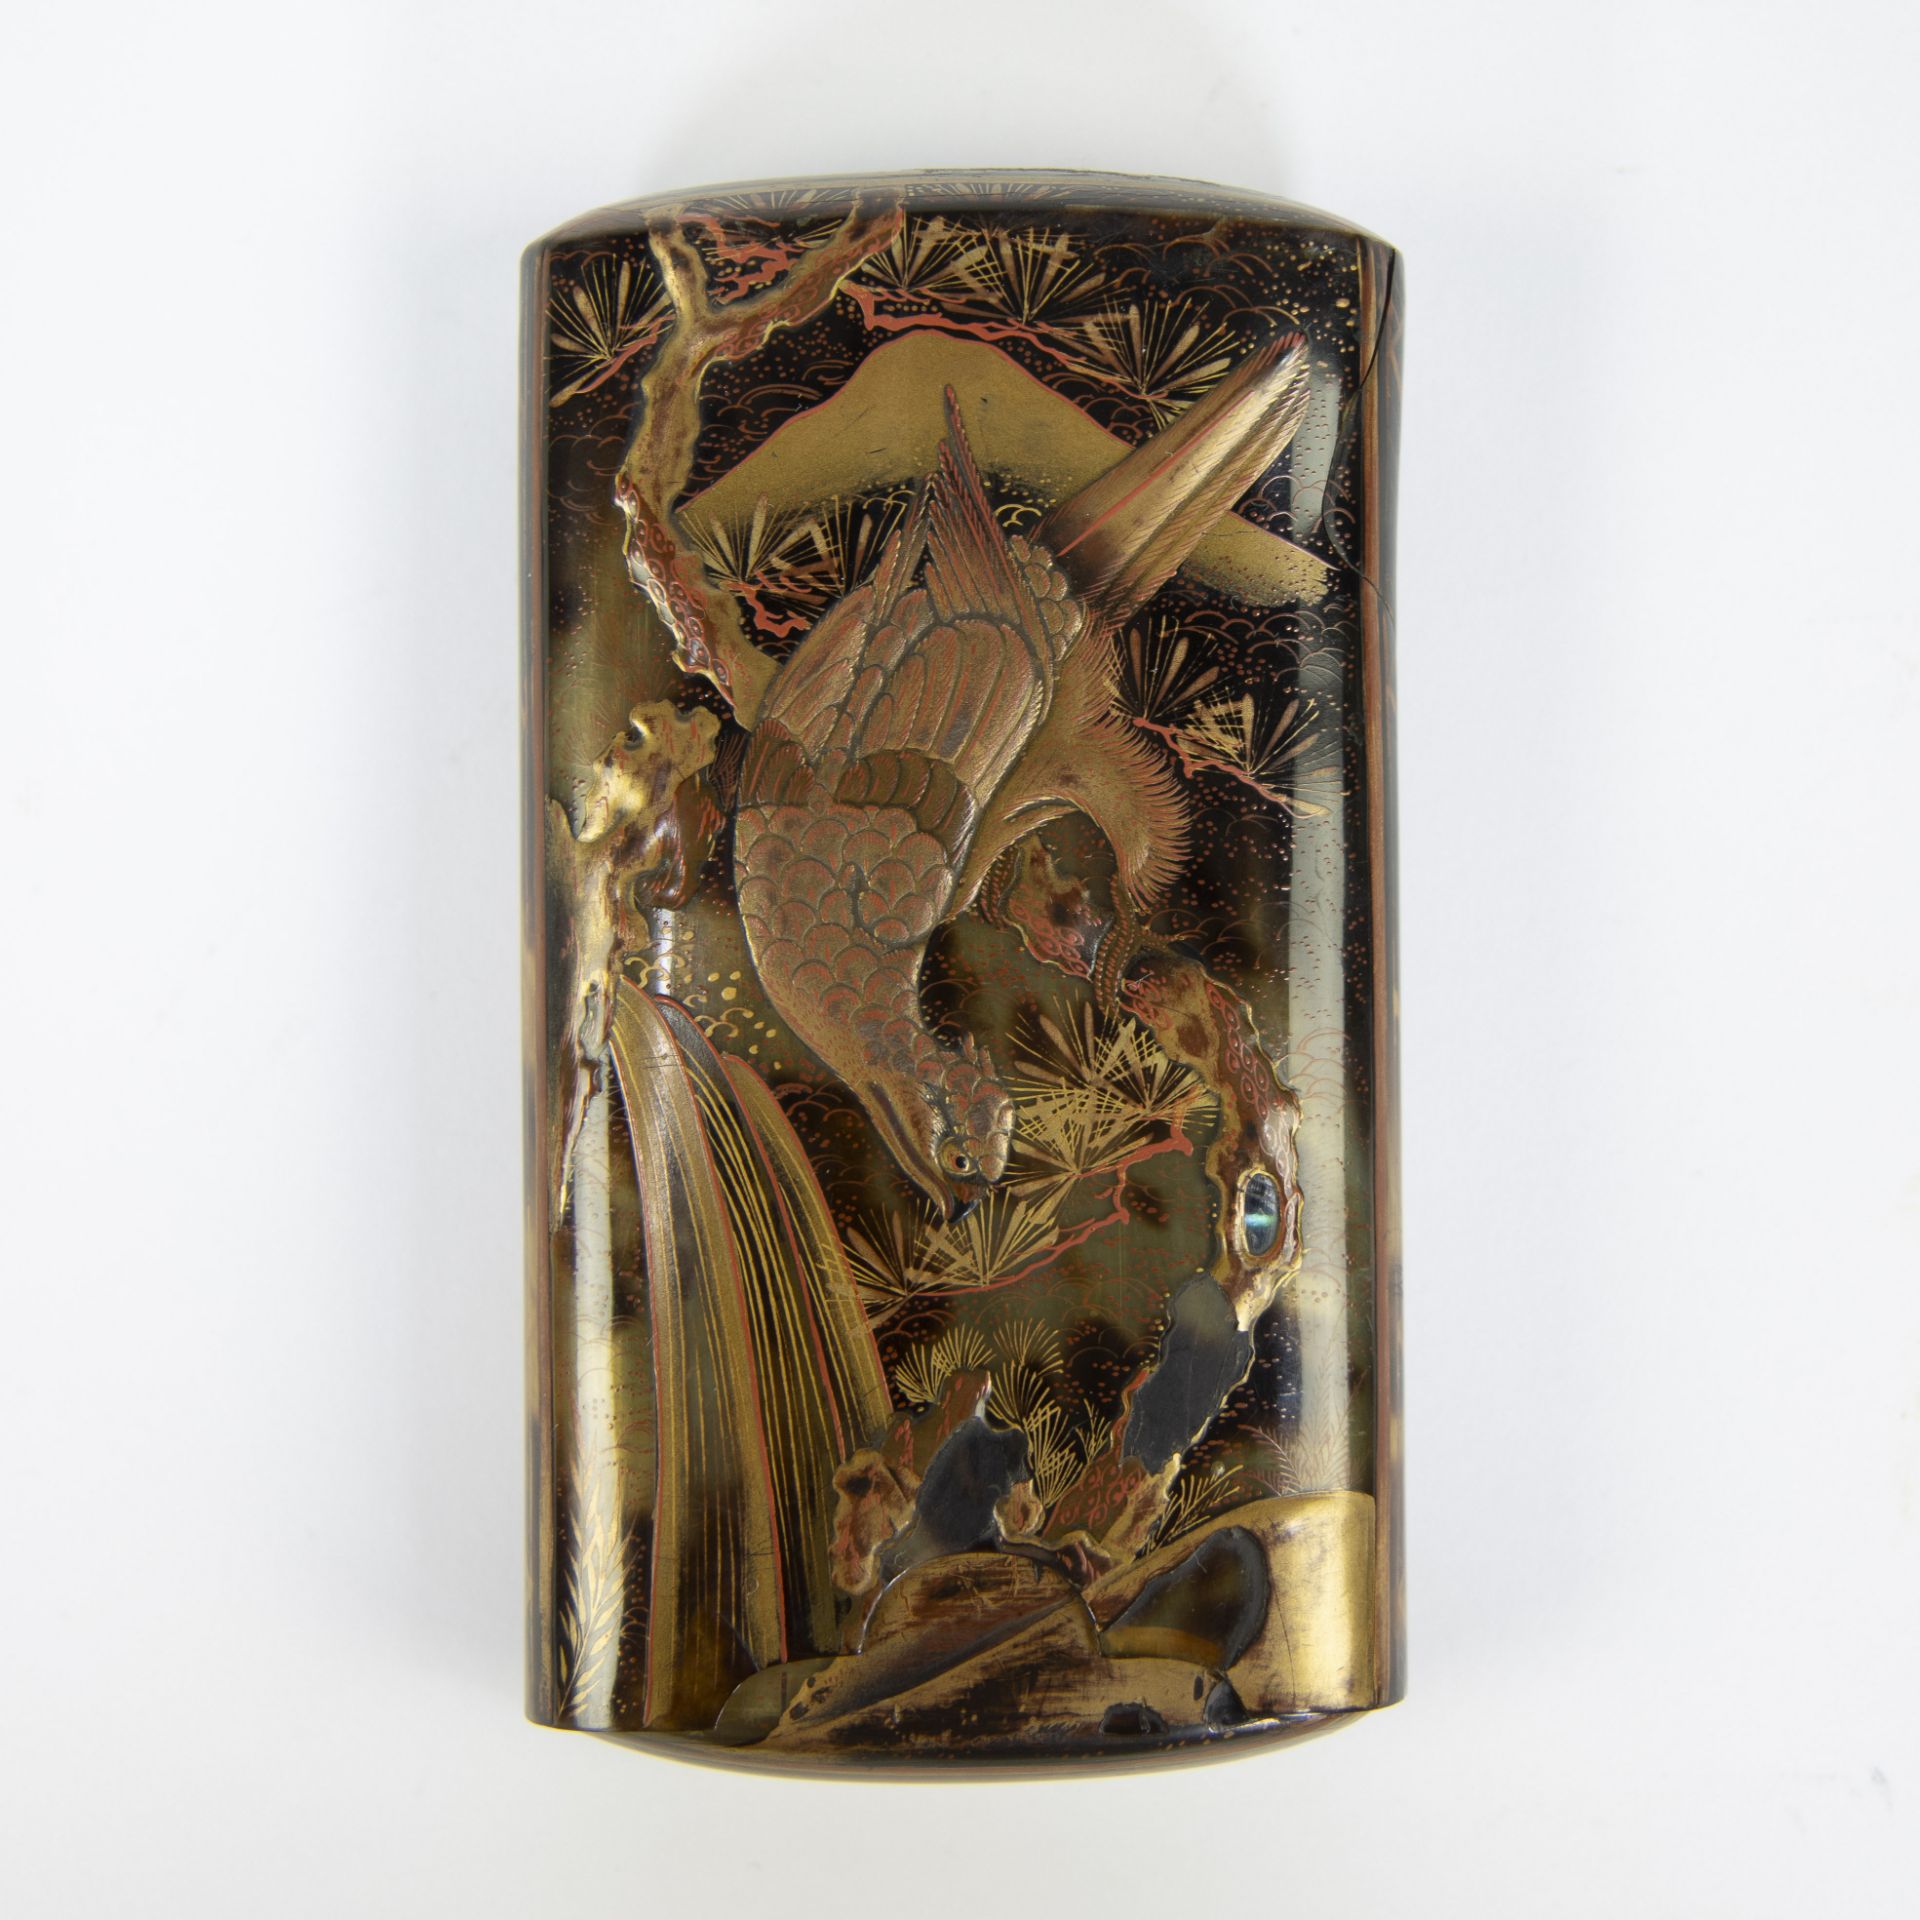 A Japanese Meiji period lacquered tortoiseshell cigar case decorated with cranes and birds in a land